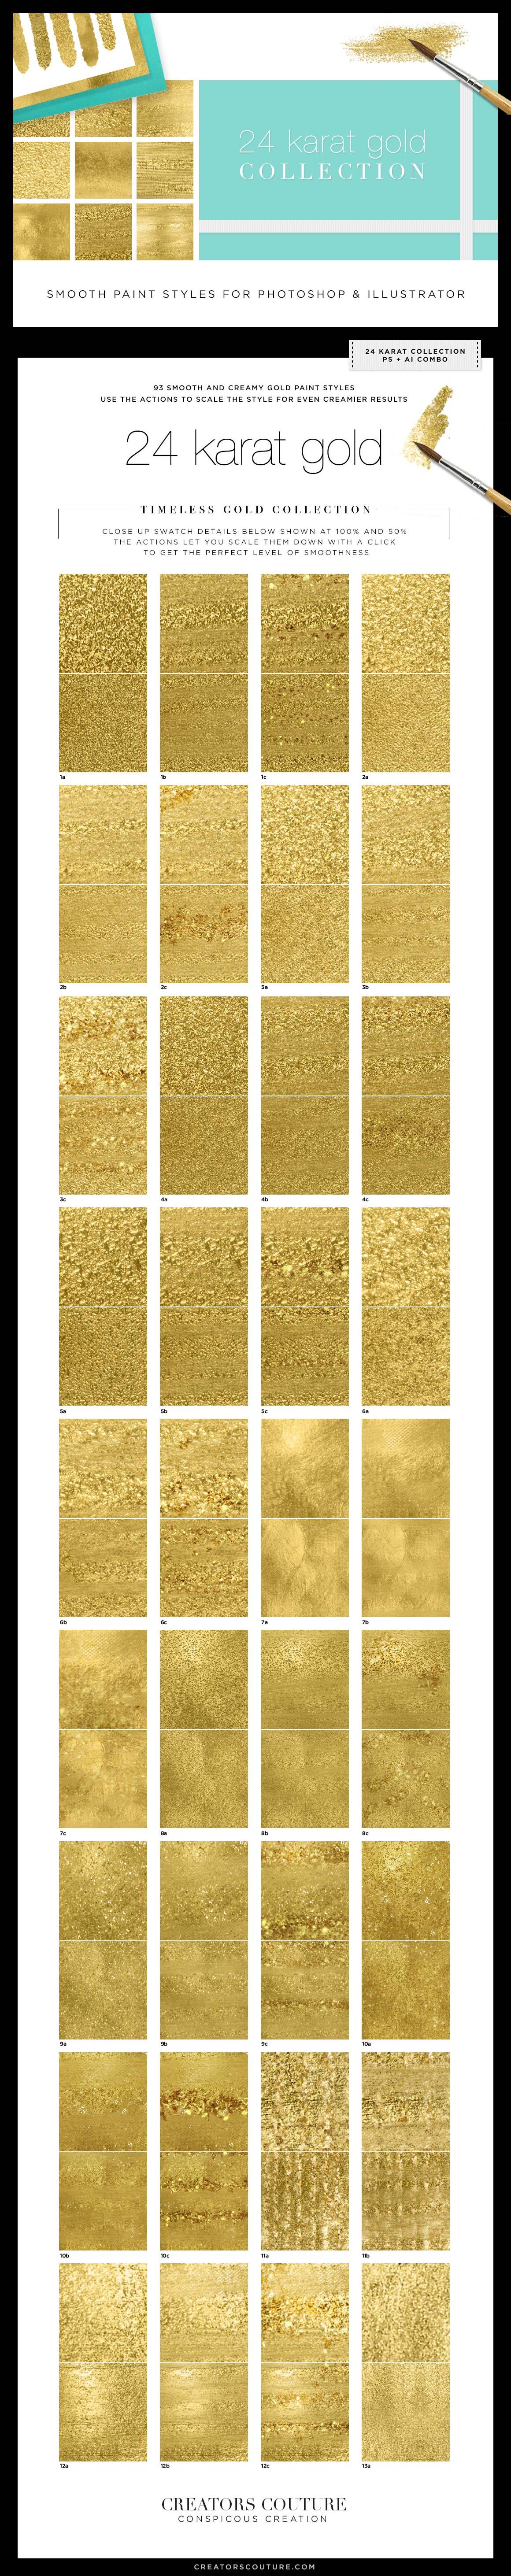 Liquid Gold Paint Textures+Stylescover image.